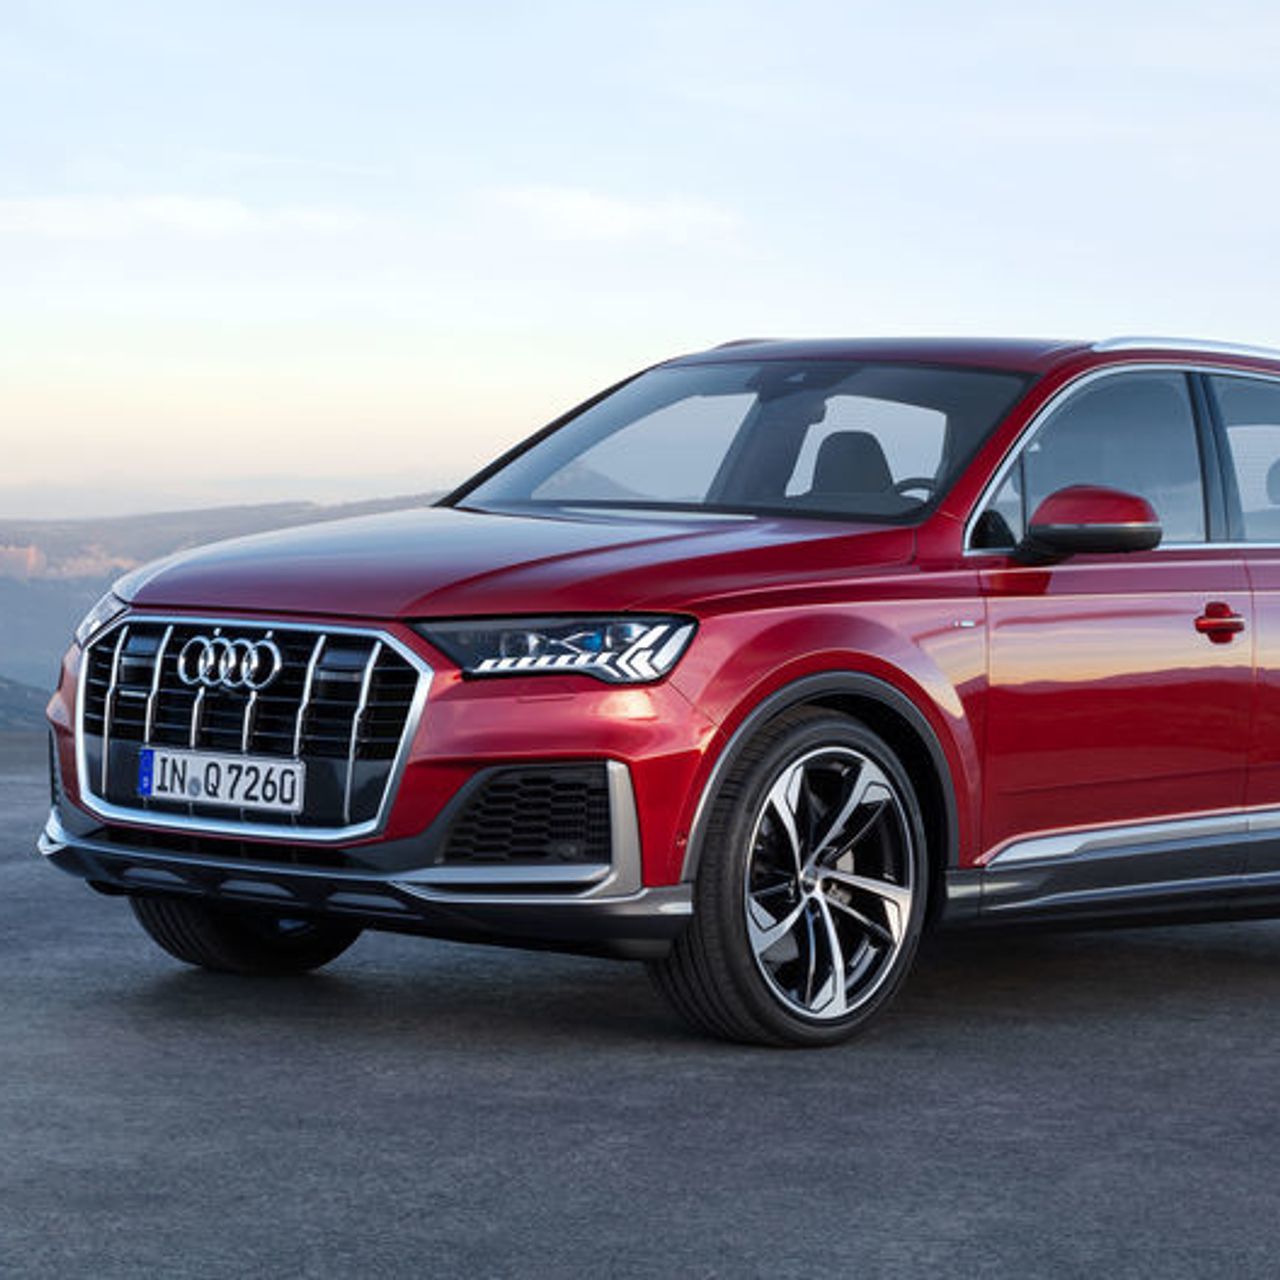 The 2022 Audi Q7 is both family-friendly and high-tech - MarketWatch